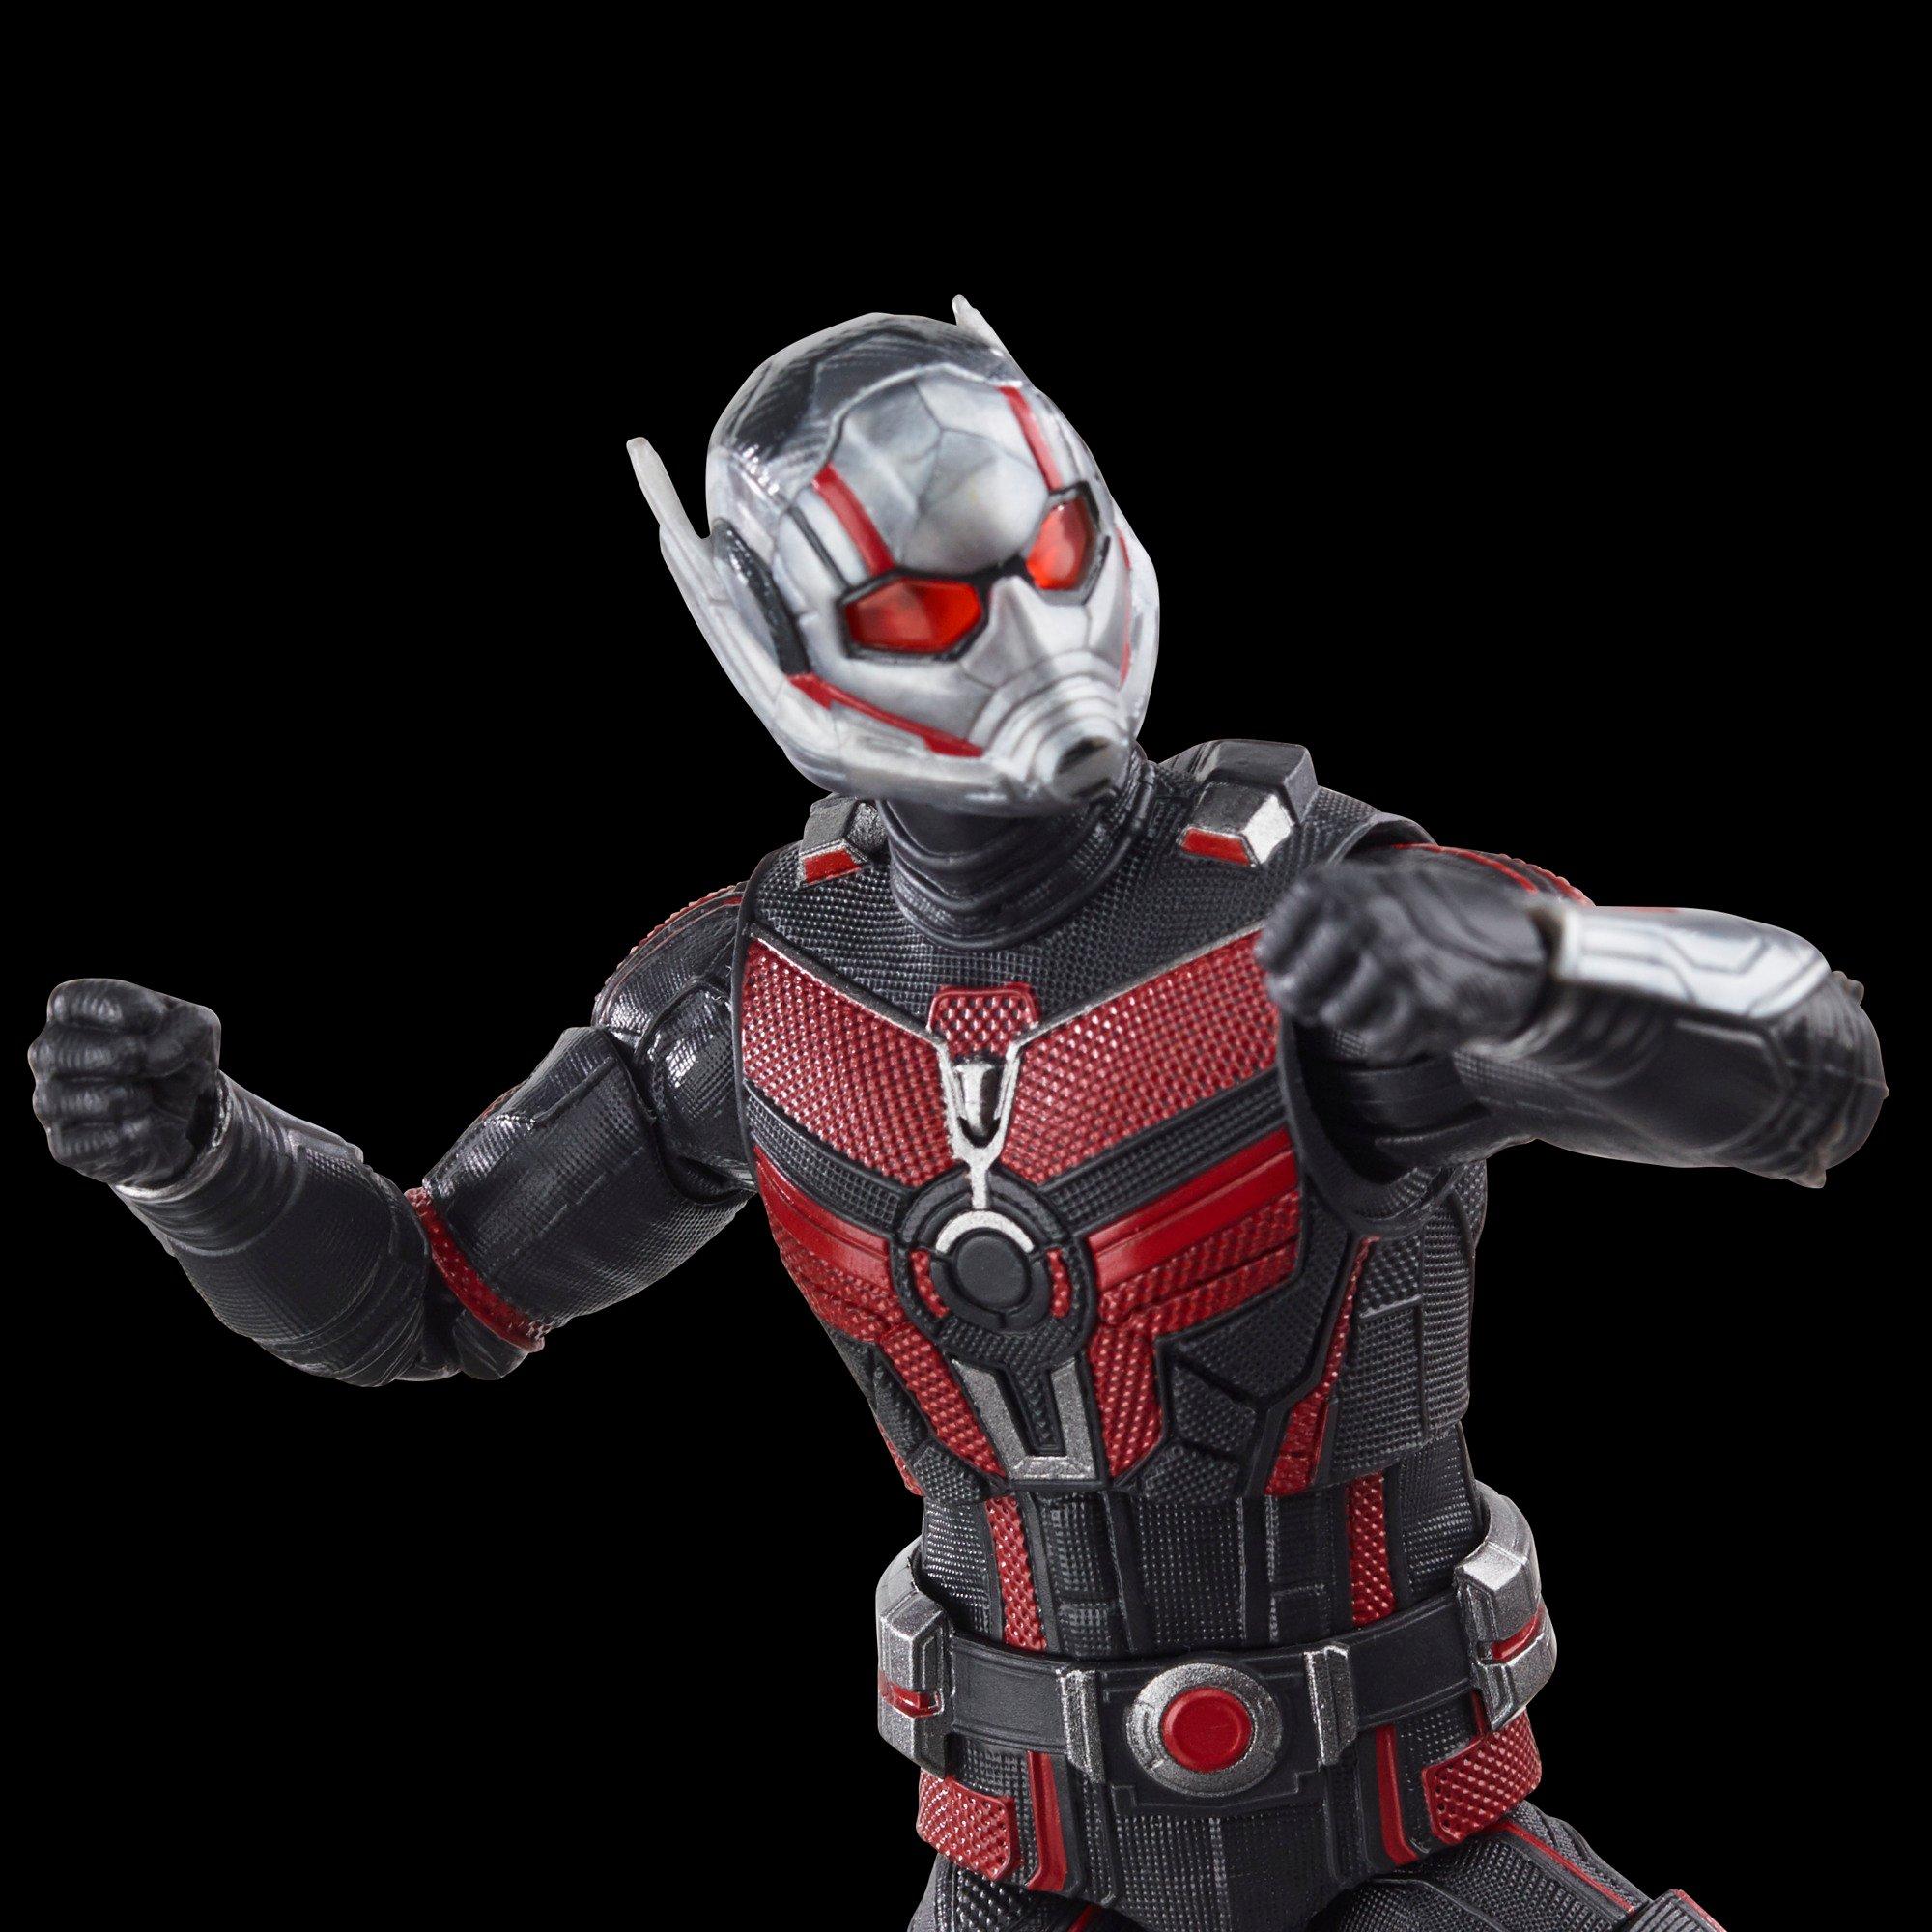  Marvel Legends Series Kang The Conqueror, Ant-Man & The Wasp:  Quantumania Collectible 6-Inch Action Figures, Ages 4 and Up : Toys & Games